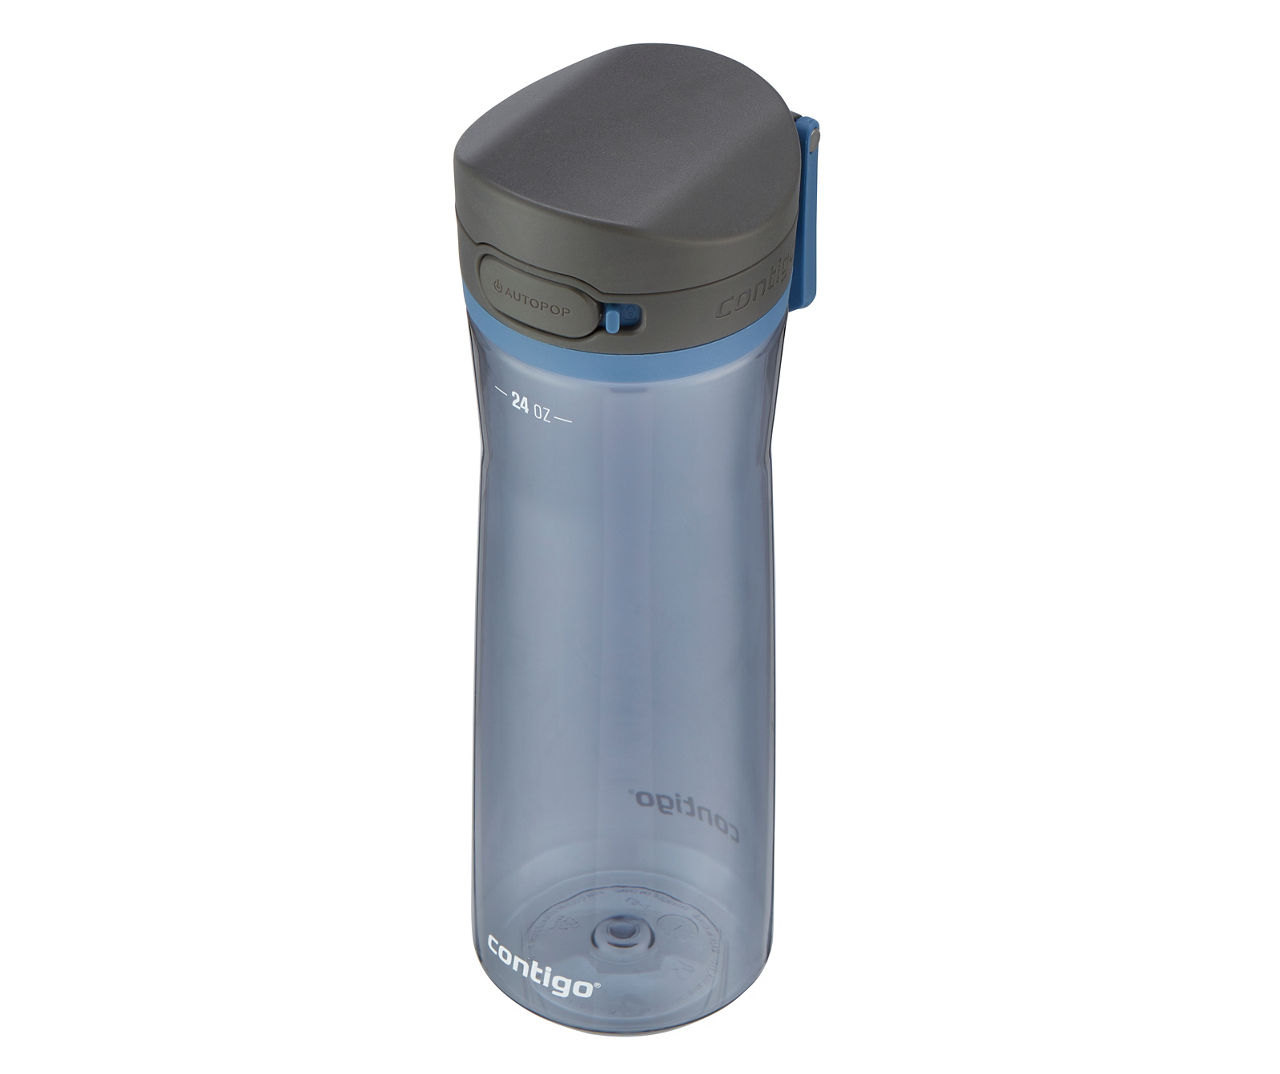 Contigo Jackson 2.0 BPA-Free Plastic Water Bottle with Leak-Proof Lid, Chug  Mouth Design with